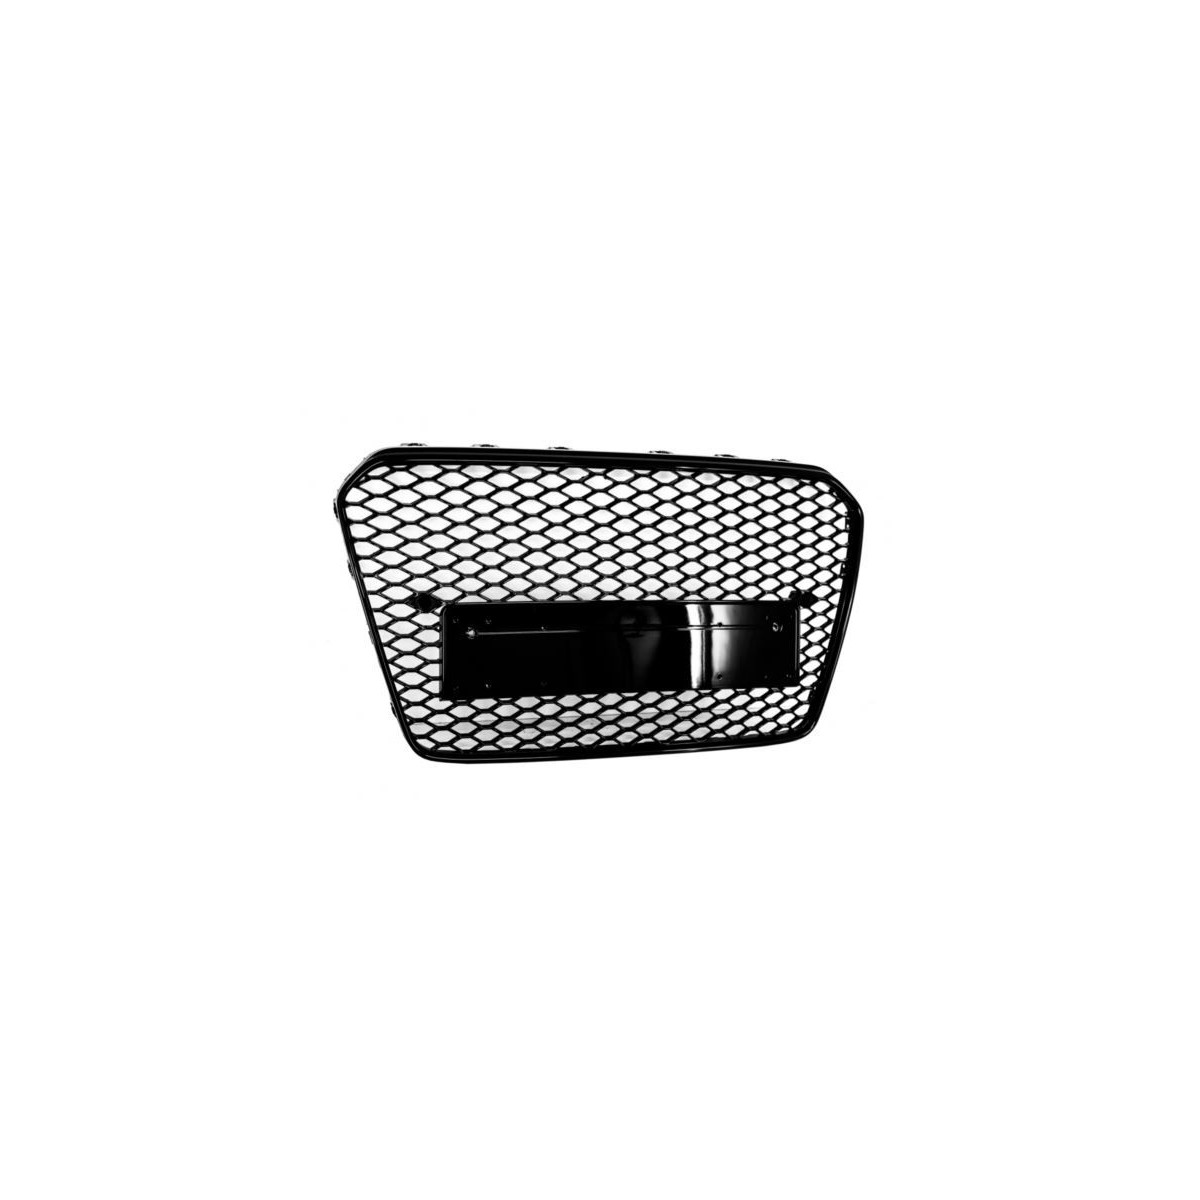 GRILL AUDI A5 11-15 LOOK RS5 GLSSY BLACK PDC